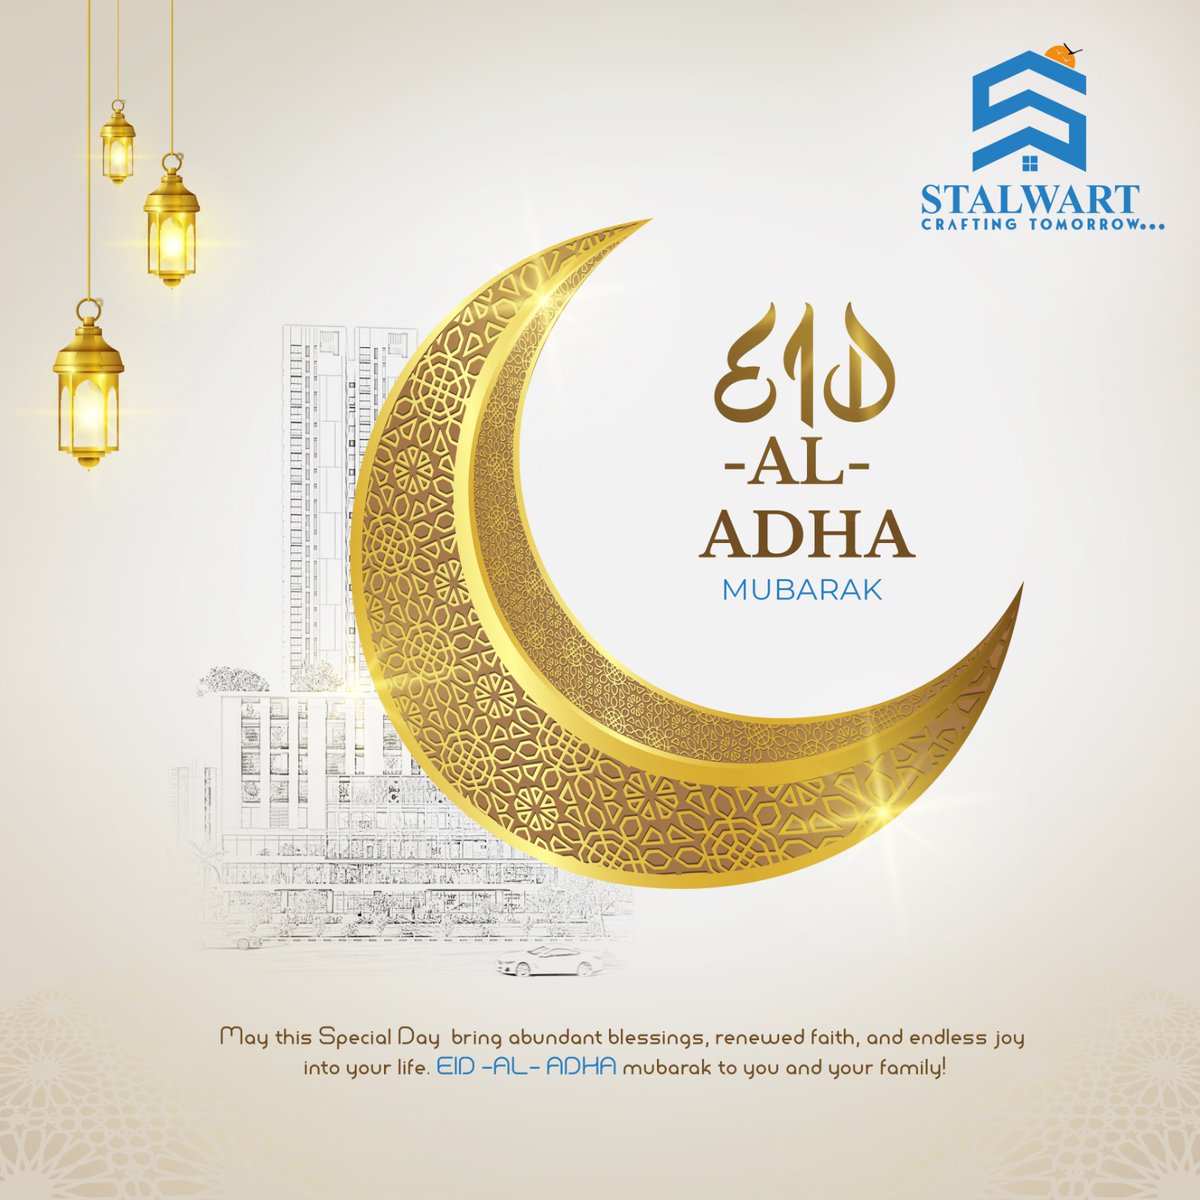 Eid Mubarak! May this auspicious occasion bring prosperity and happiness to your life. Build your dreams with Stalwart and make this Eid memorable.

#EidMubarak #StalwartBuilders #BuildYourDreams #EidBlessings #EidCelebrations #ConstructionGoals #DreamHome #BuildingDreams